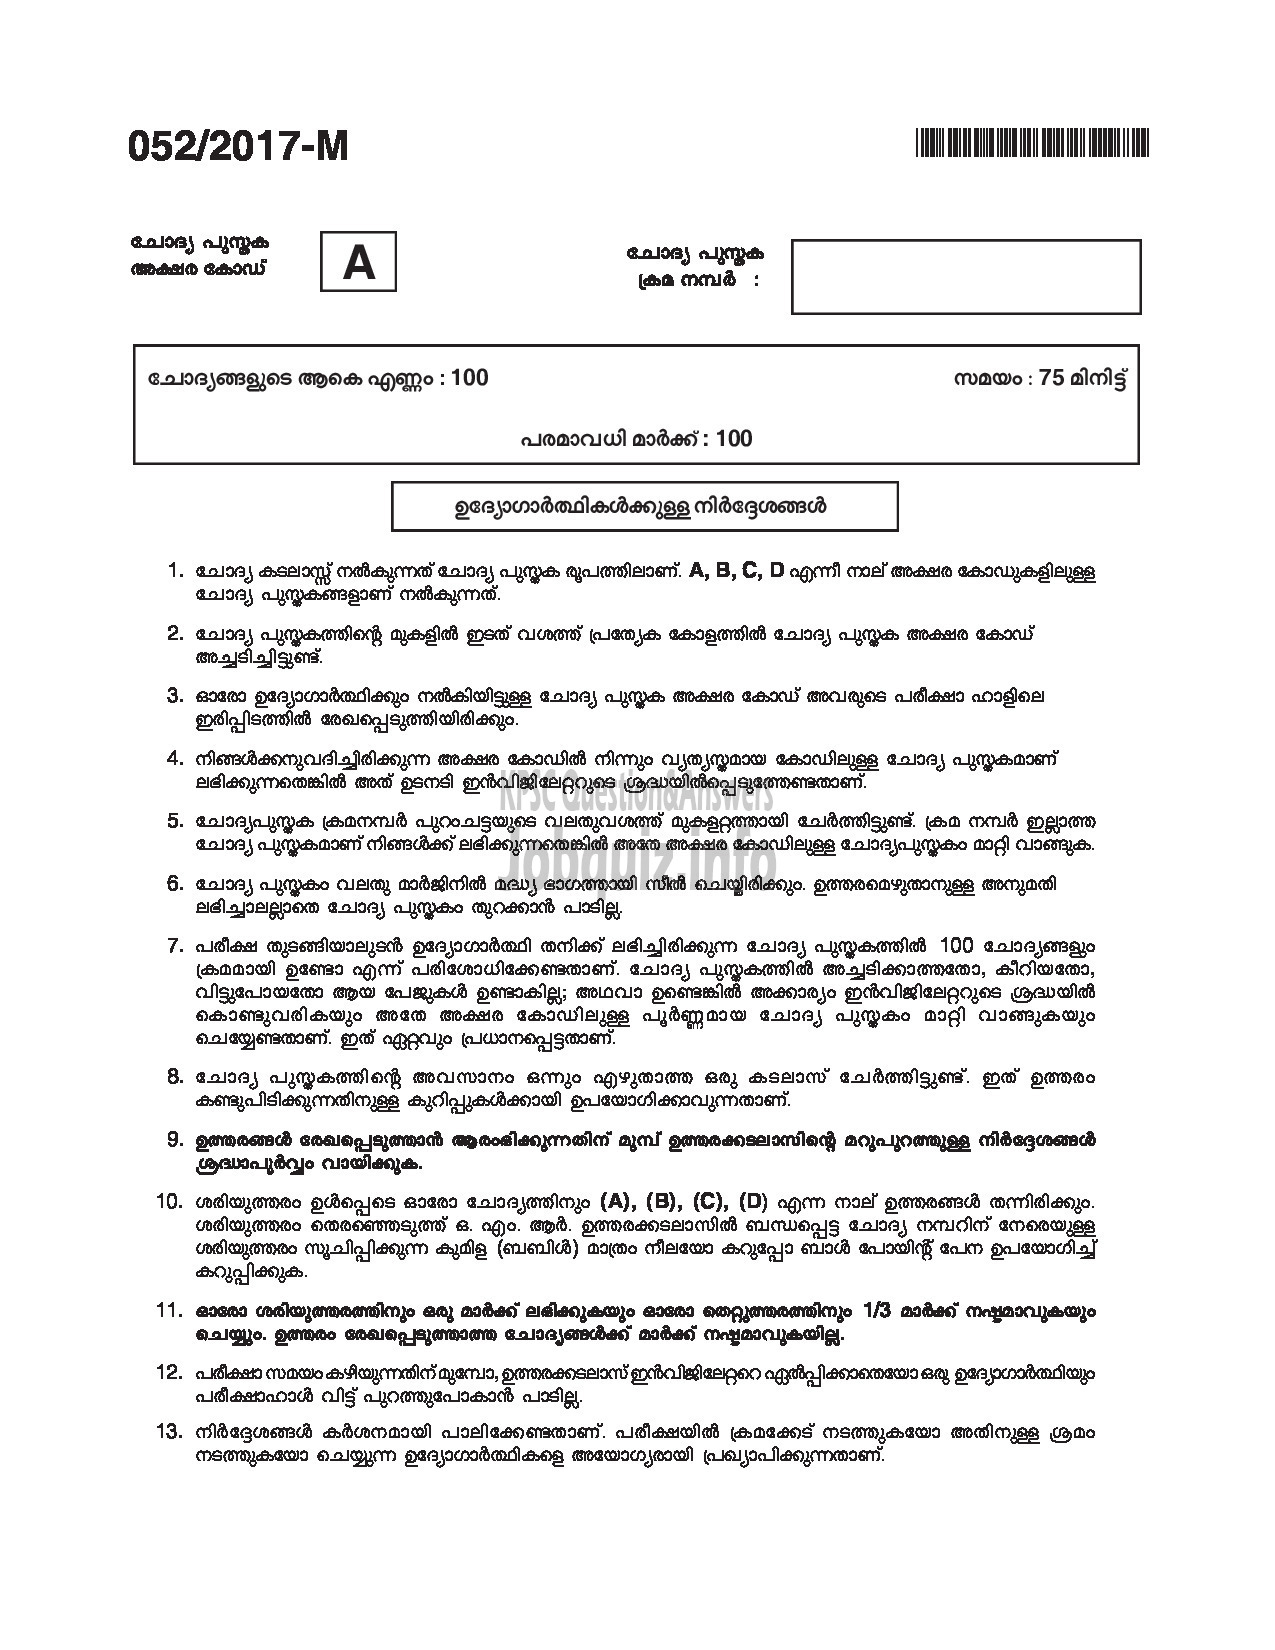 Kerala PSC Question Paper - WOMEN POLICE CONSTABLE APB POLICE QUESTION PAPER(MALAYALAM)-1